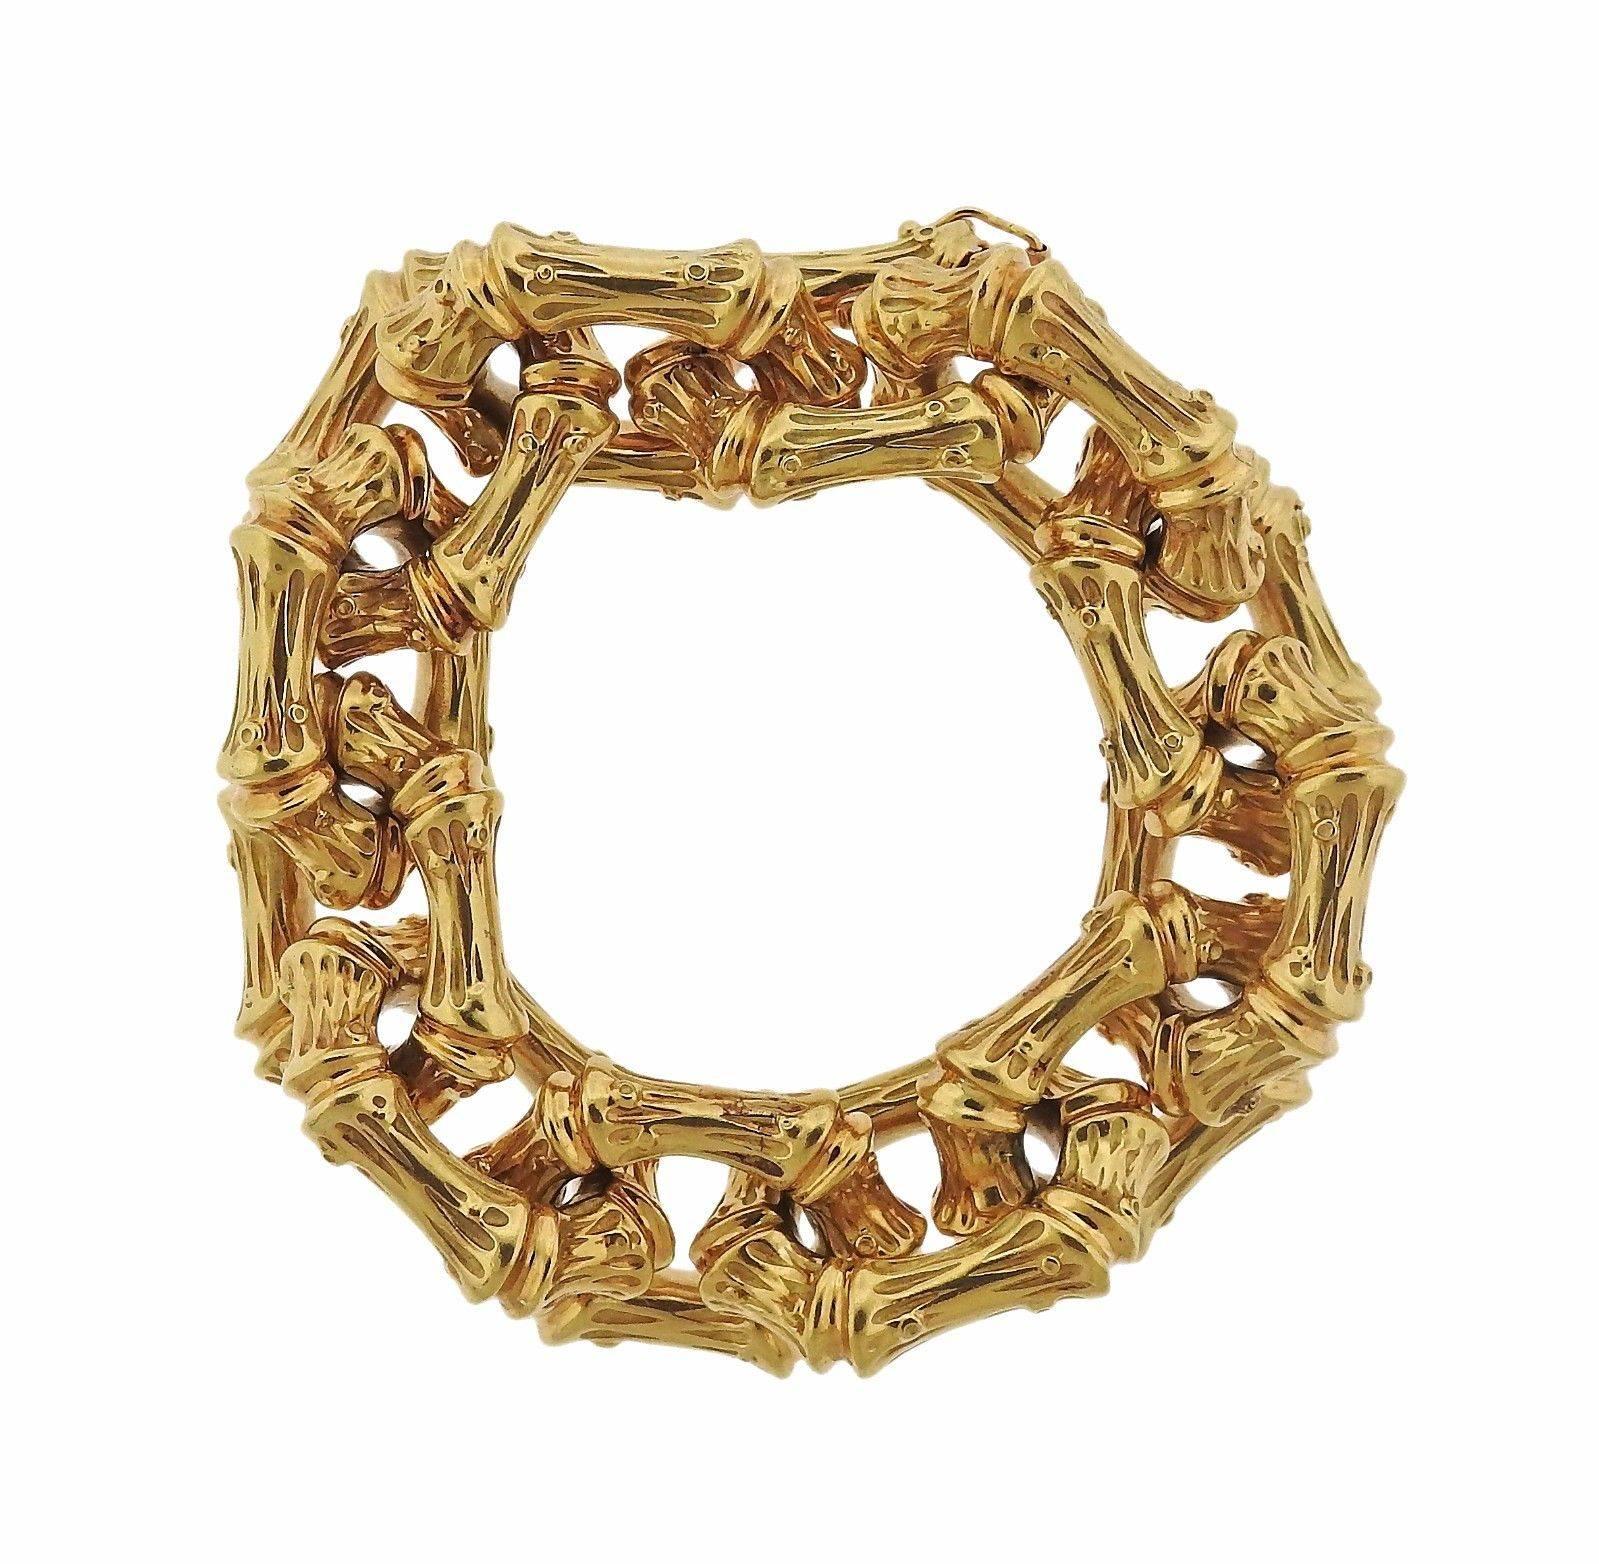 An 18k yellow gold bamboo motif bracelet by Tiffany & Co.  The bracelet is 8 3/4" long and 23mm wide.  The weight of the piece is 178.1 grams.  Marked: Tiffany , 18k.